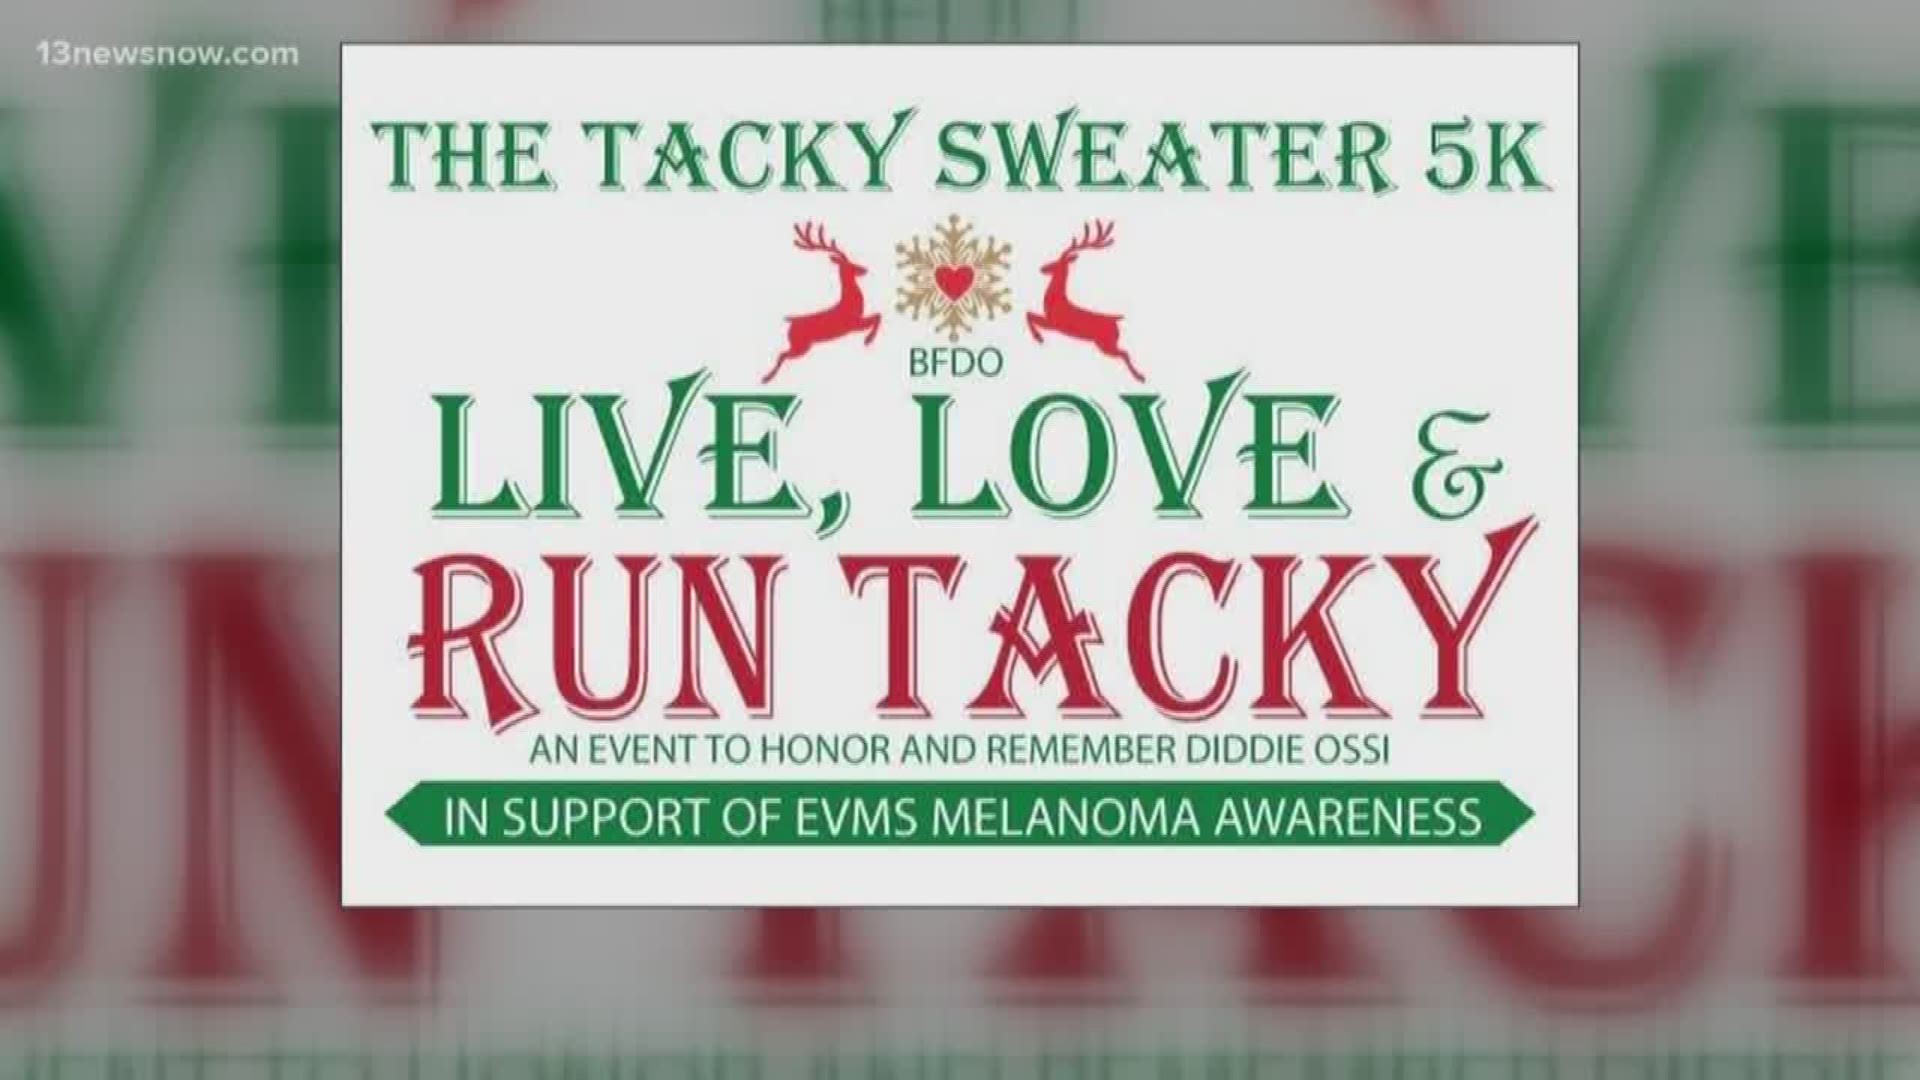 The Tacky Sweater 5K is back for its seventh year. The race raises money for EVMS Dermatology and the Dermatology Student Group.